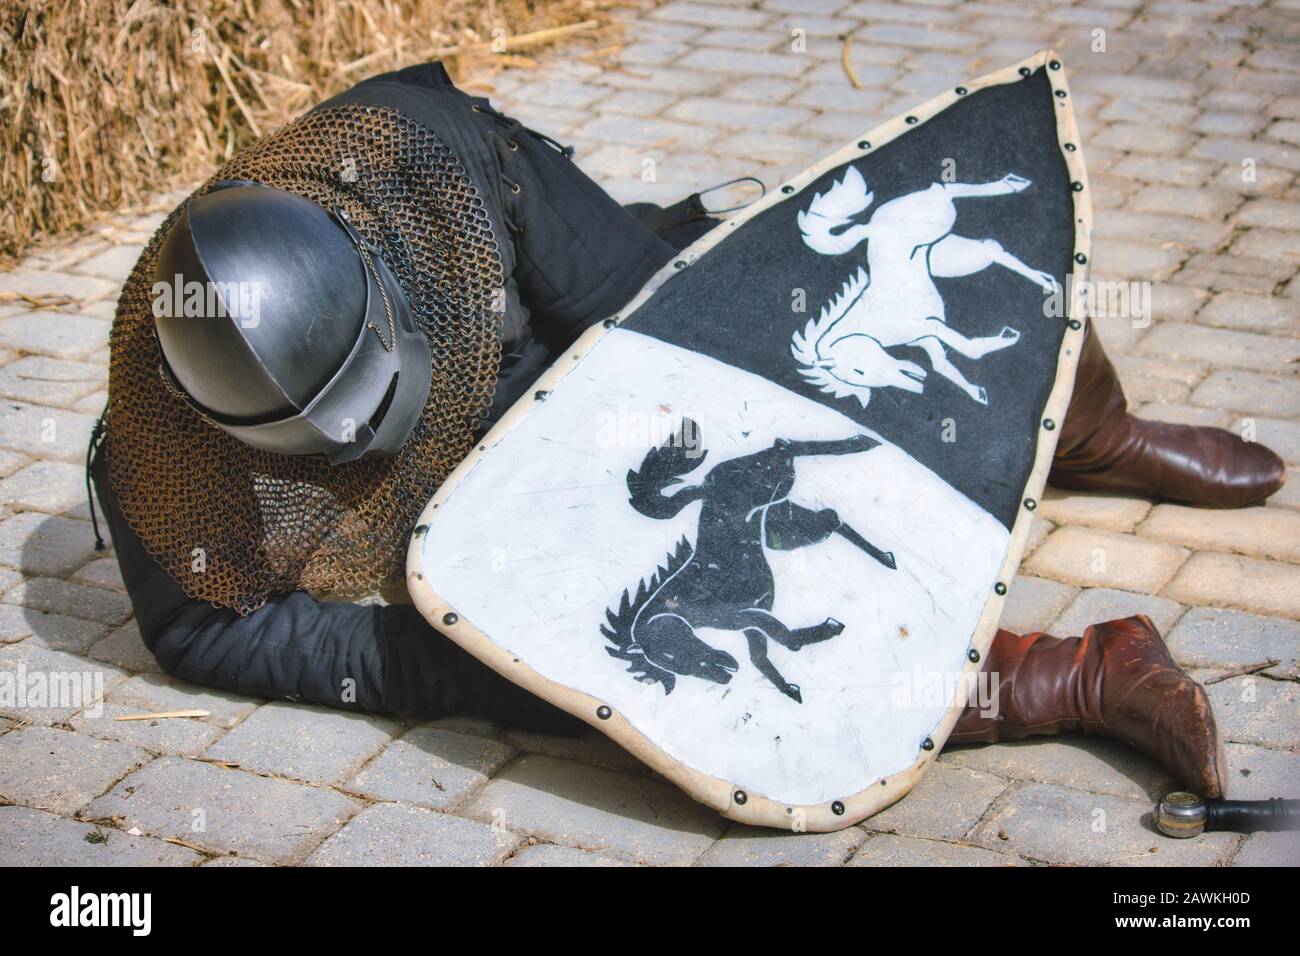 A medieval knight in full body armour lying injured on the ground Stock Photo